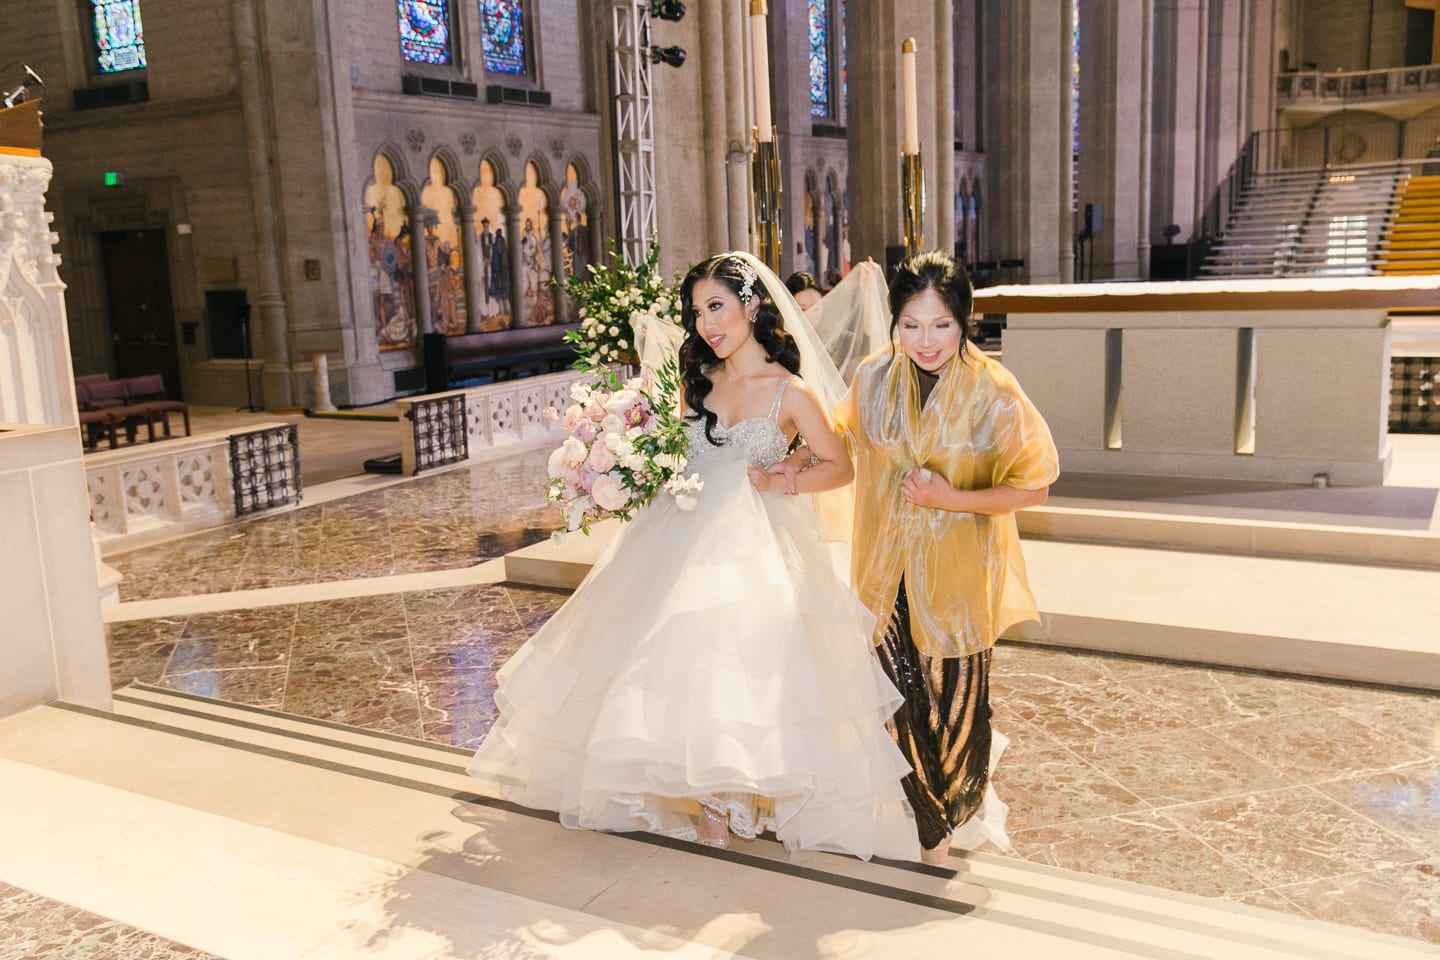 fairmont_hotel_grace_cathedral_wedding_014.jpg